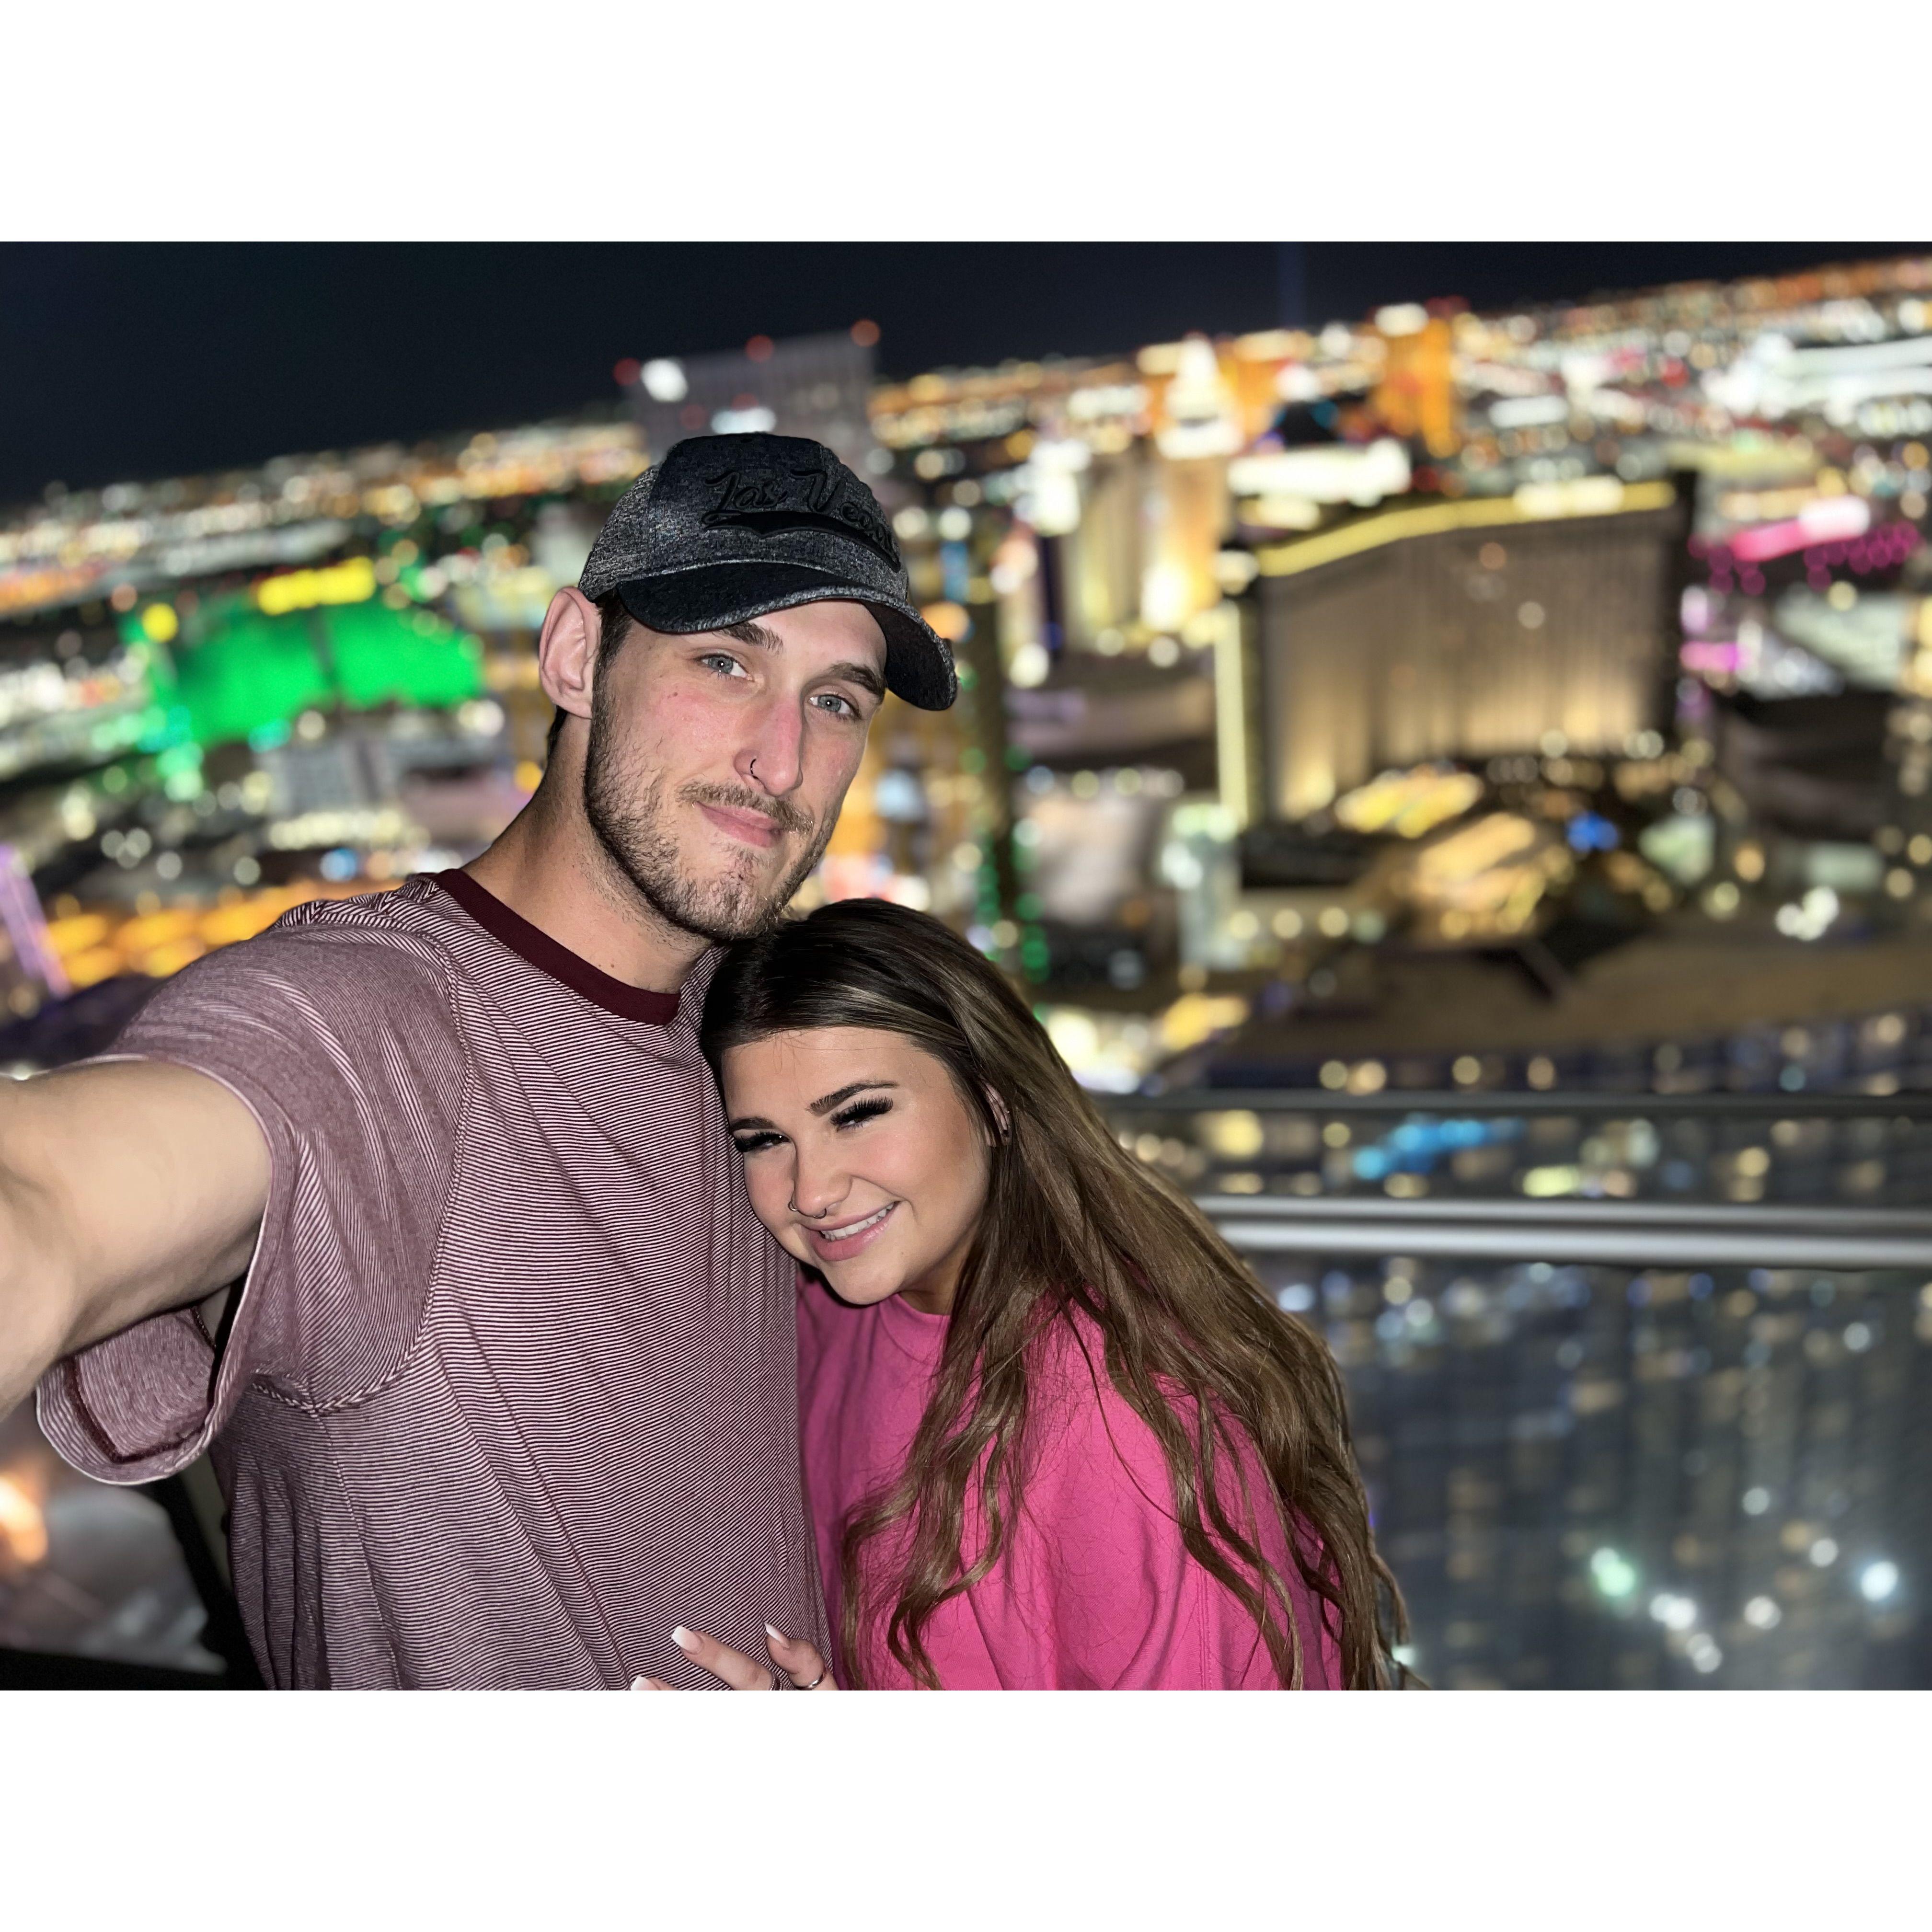 One of Zach and Sam in one of there favorite places - Las Vegas!